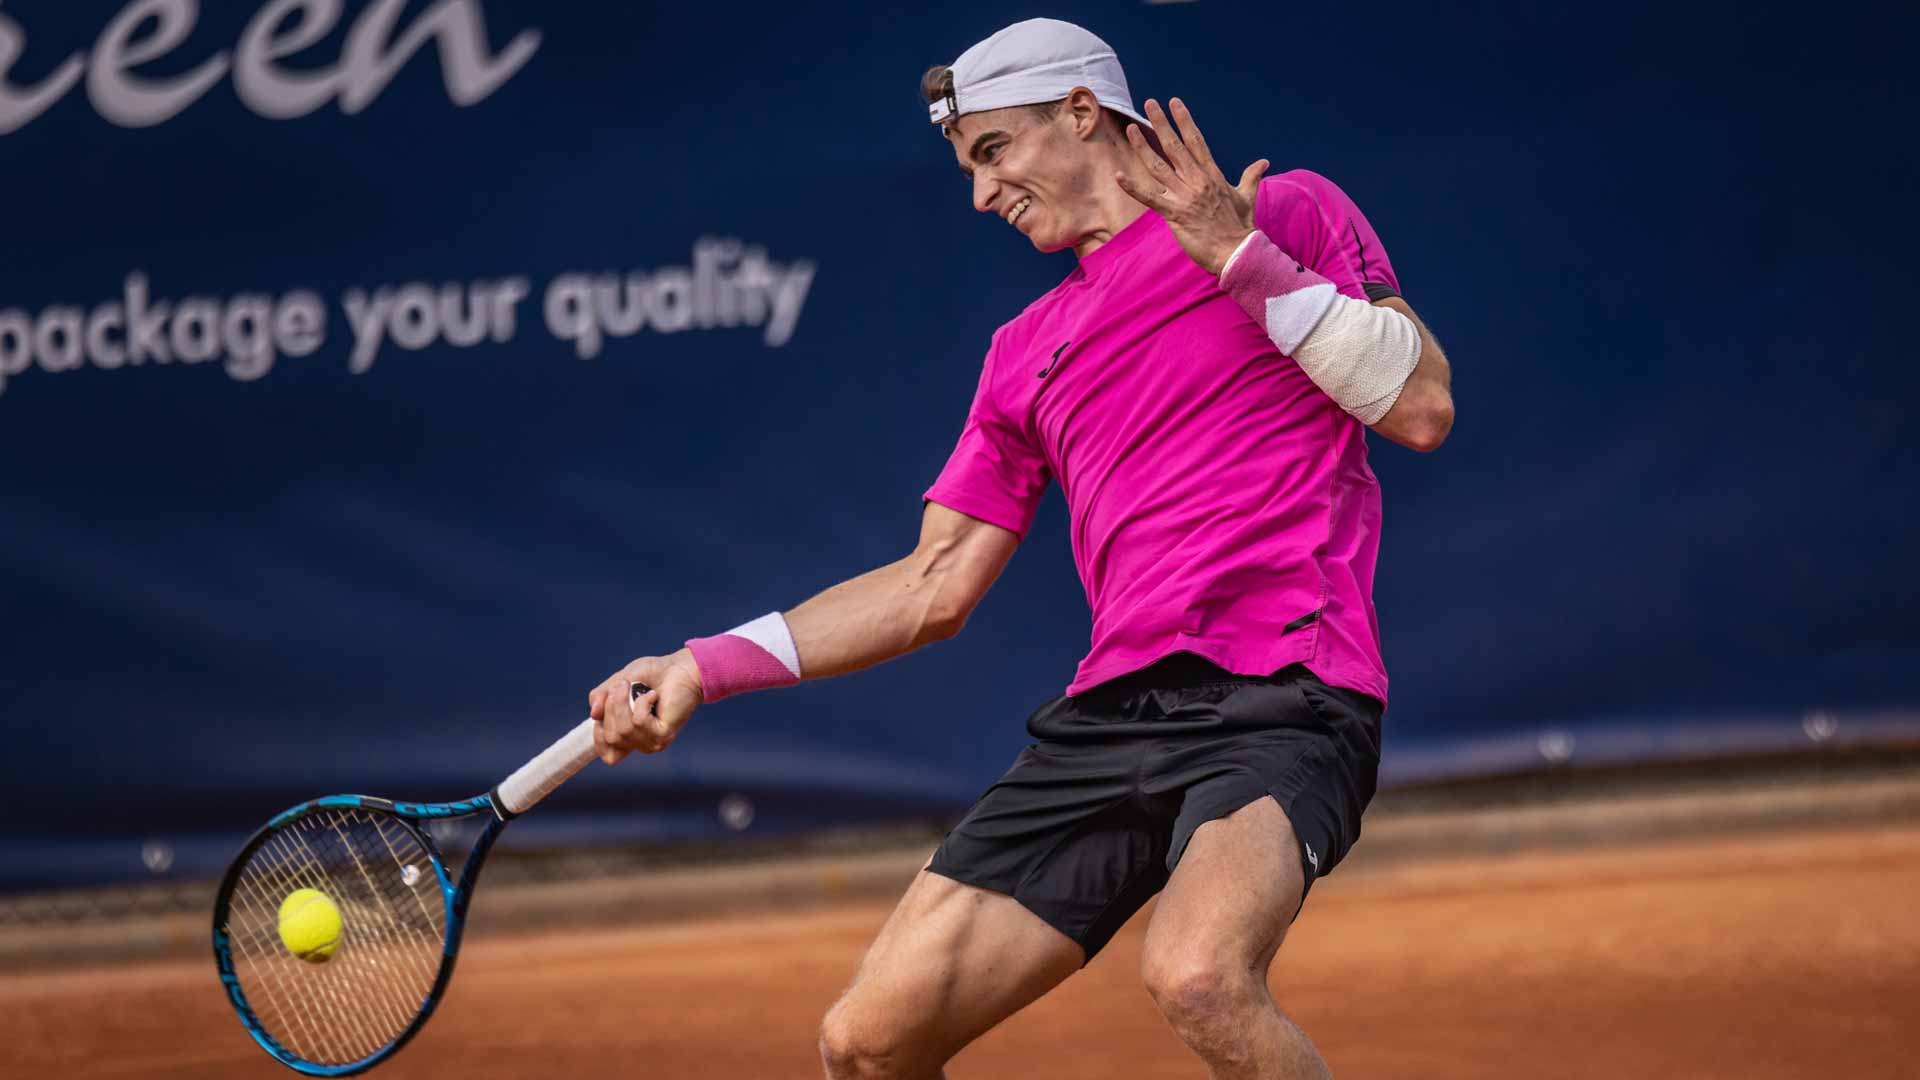 Timofey Skatov in action at the 2022 Parma Challenger.